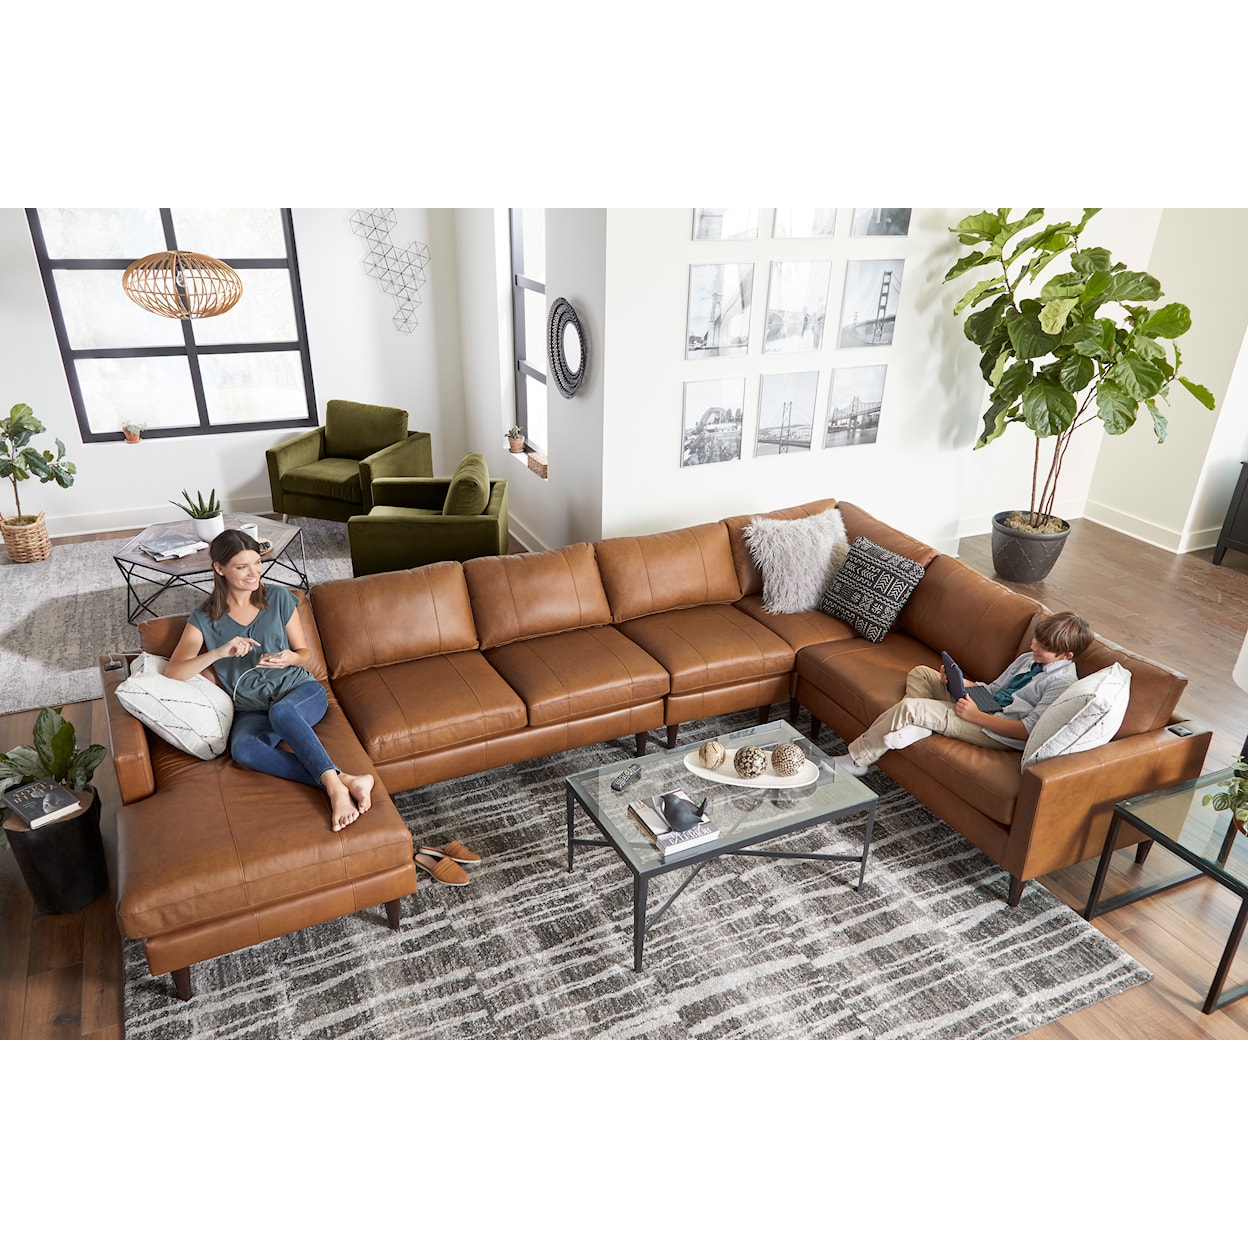 Bravo Furniture Trafton Leather Sectional Sofa w/ Chaise & Wood Feet